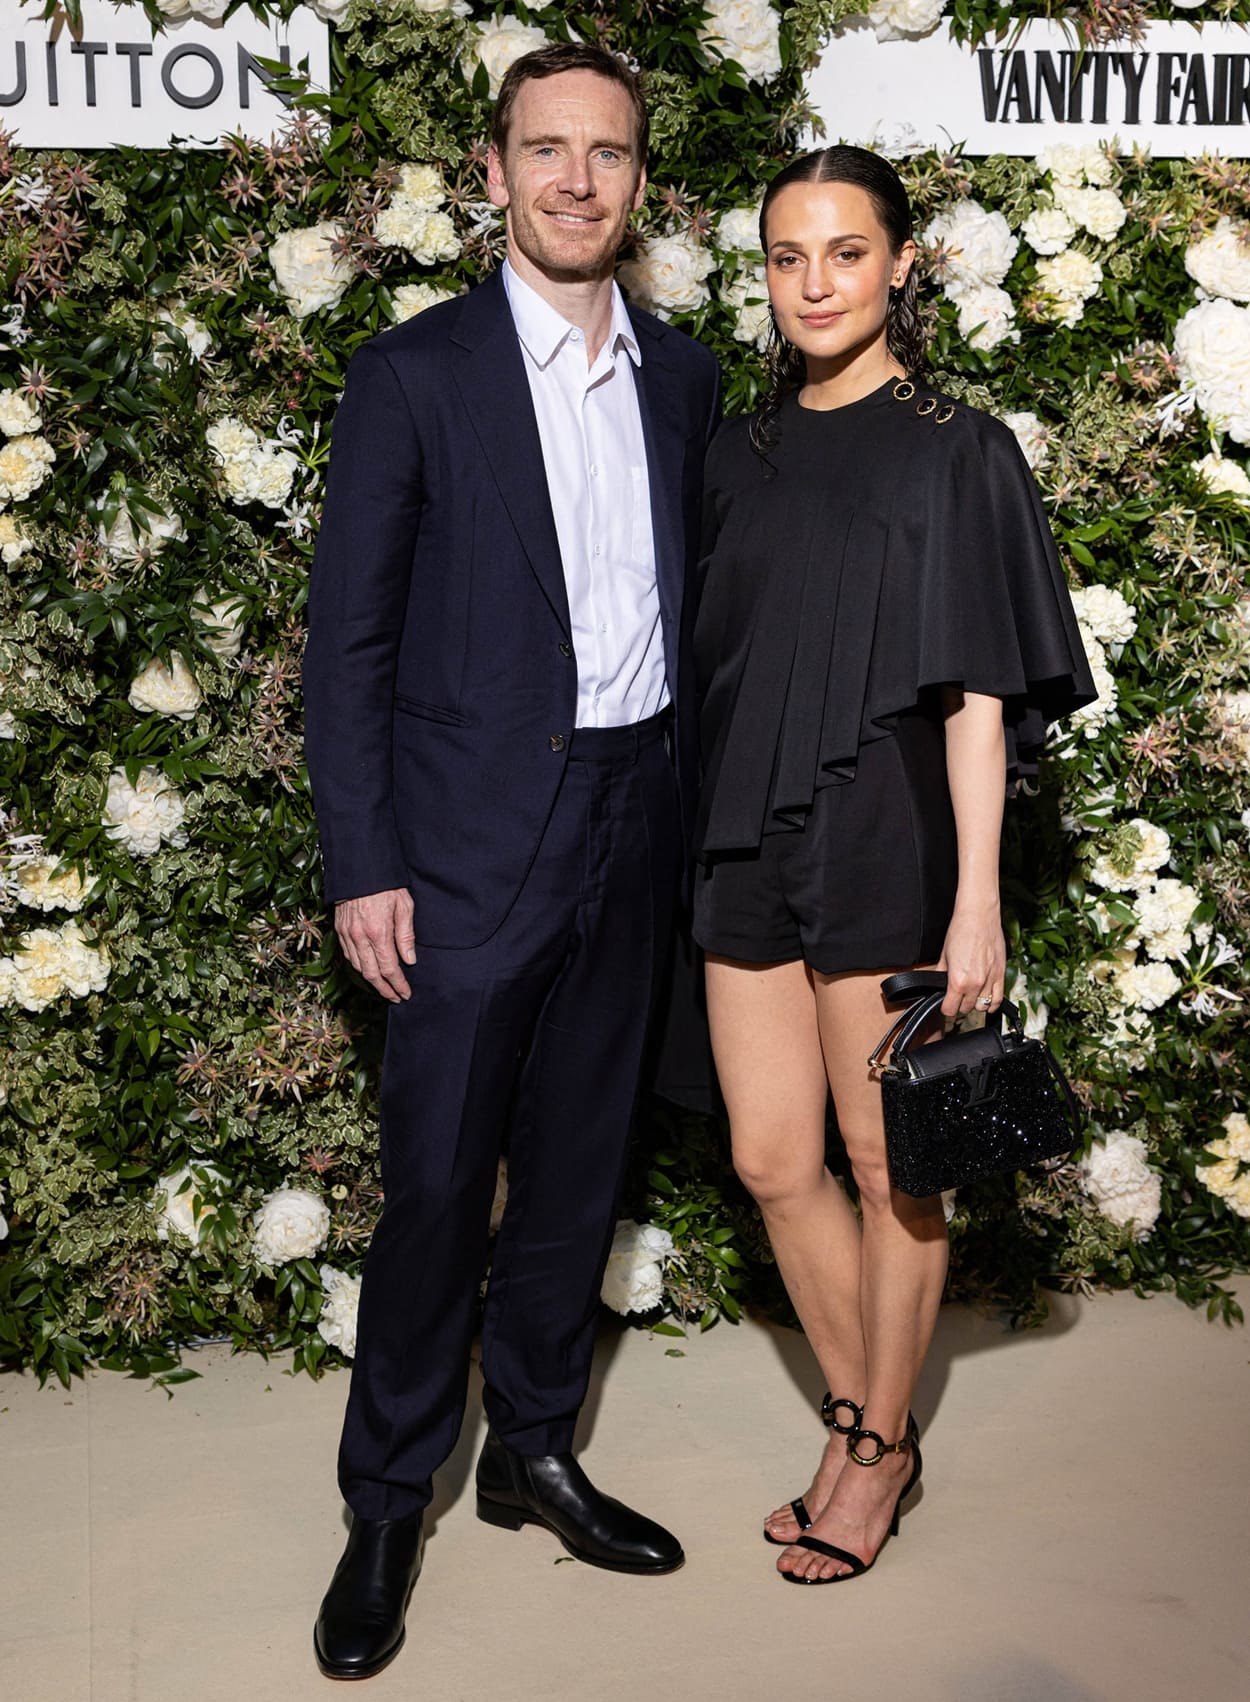 Michael Fassbender and Alicia Vikander attend the Vanity Fair x Louis Vuitton dinner